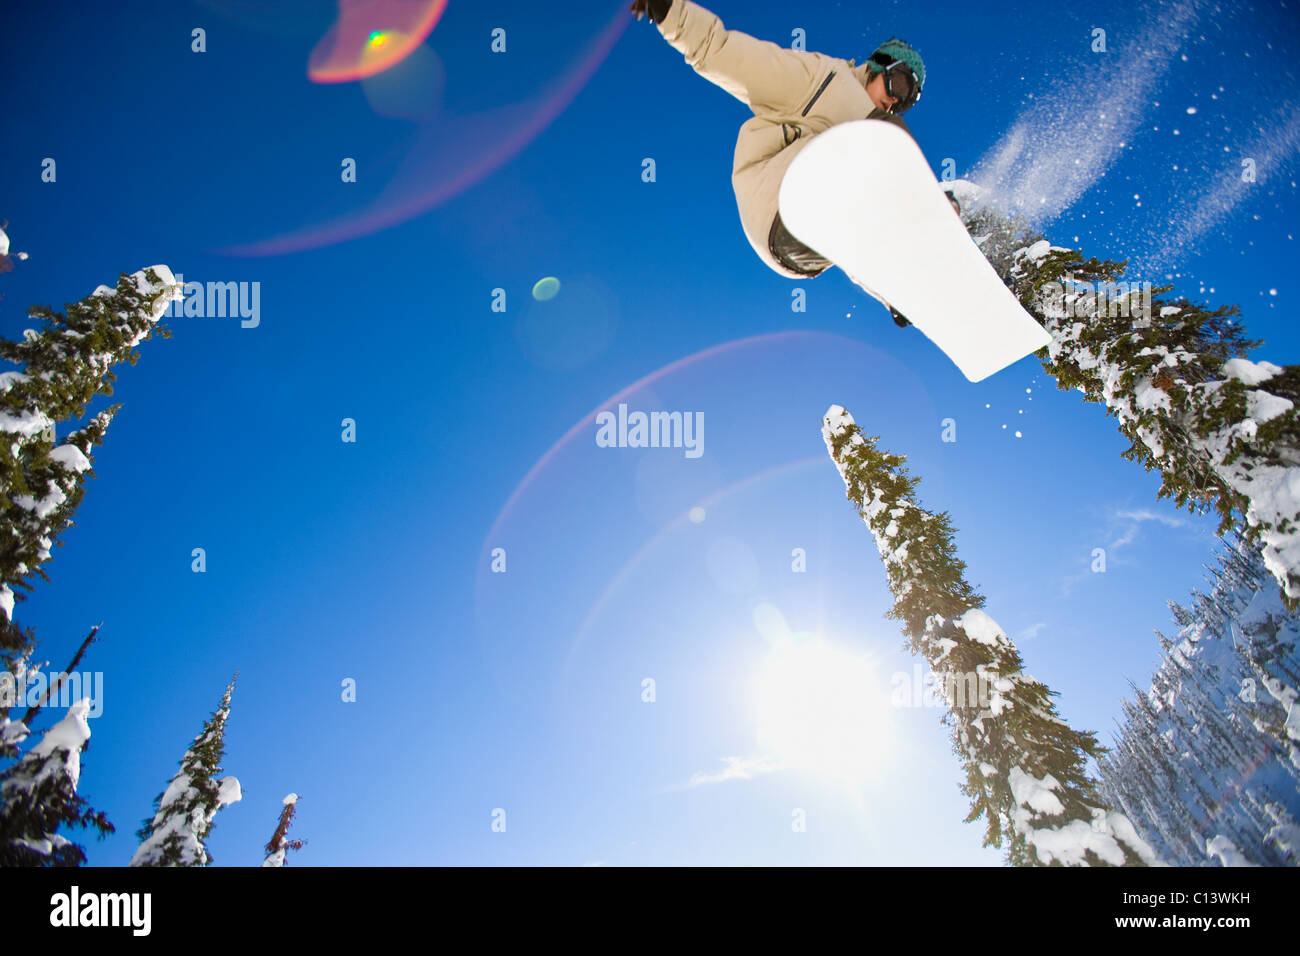 USA, Montana, Whitefish, Young man snowboarding in forest Stock Photo